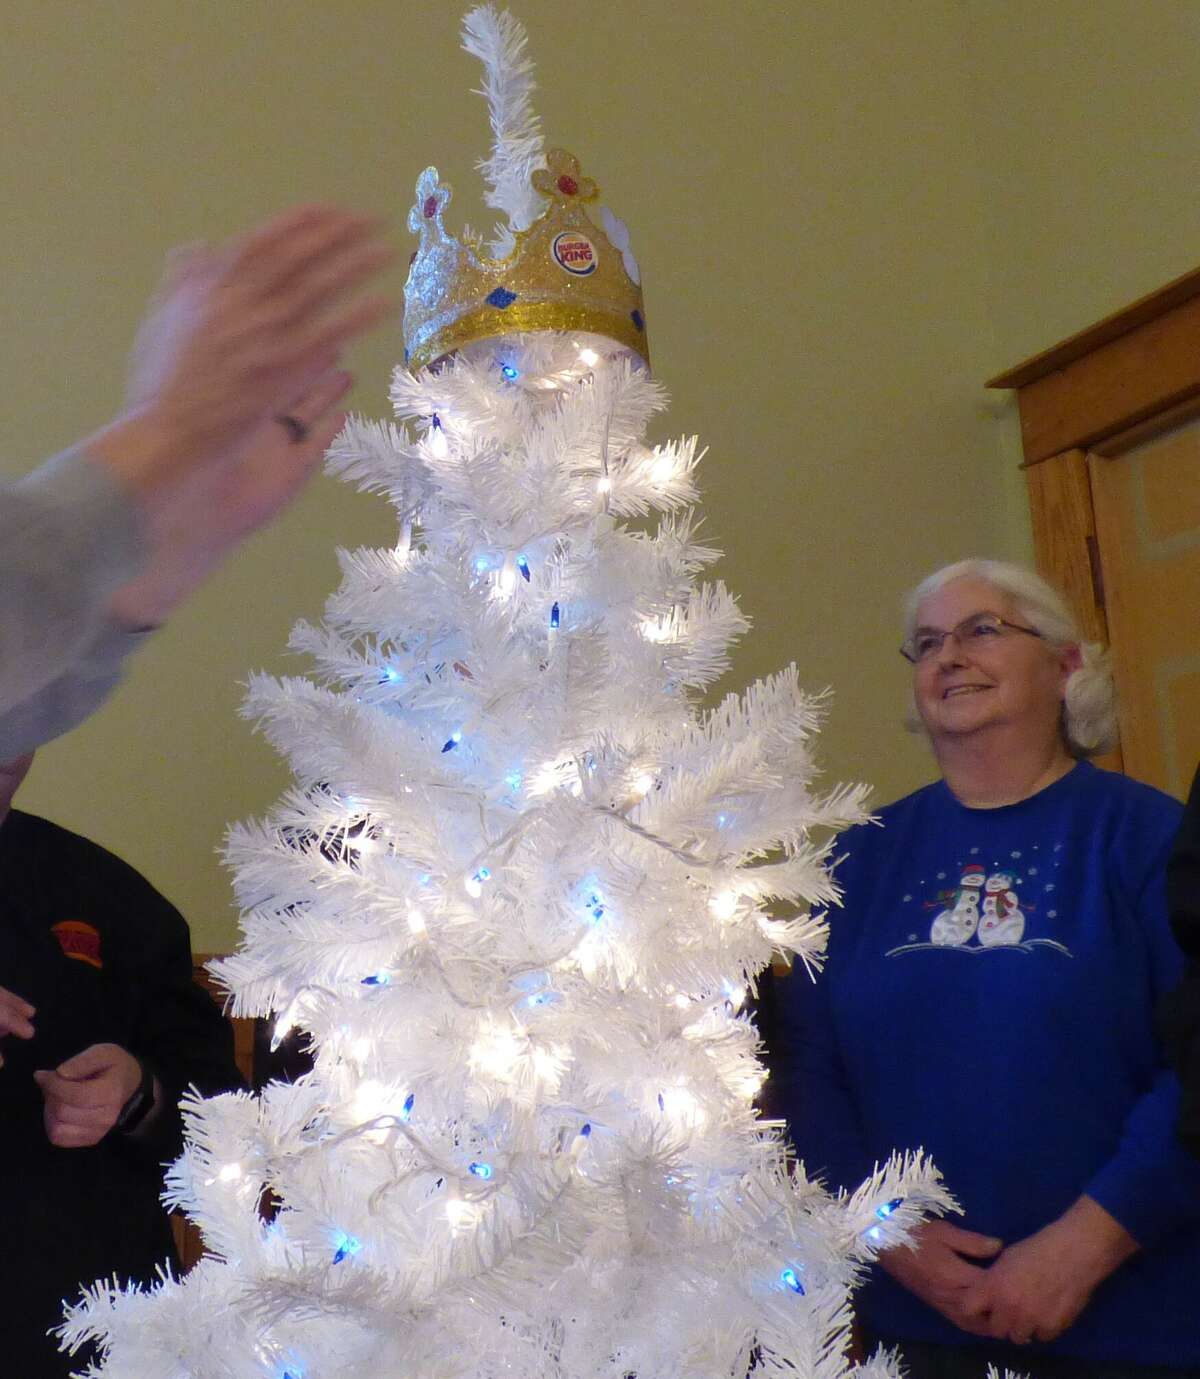 Staff from Manistee's Burger King, including Marie Baker, helped decorate a tree on Wednesday afternoon for the Festival of Trees.